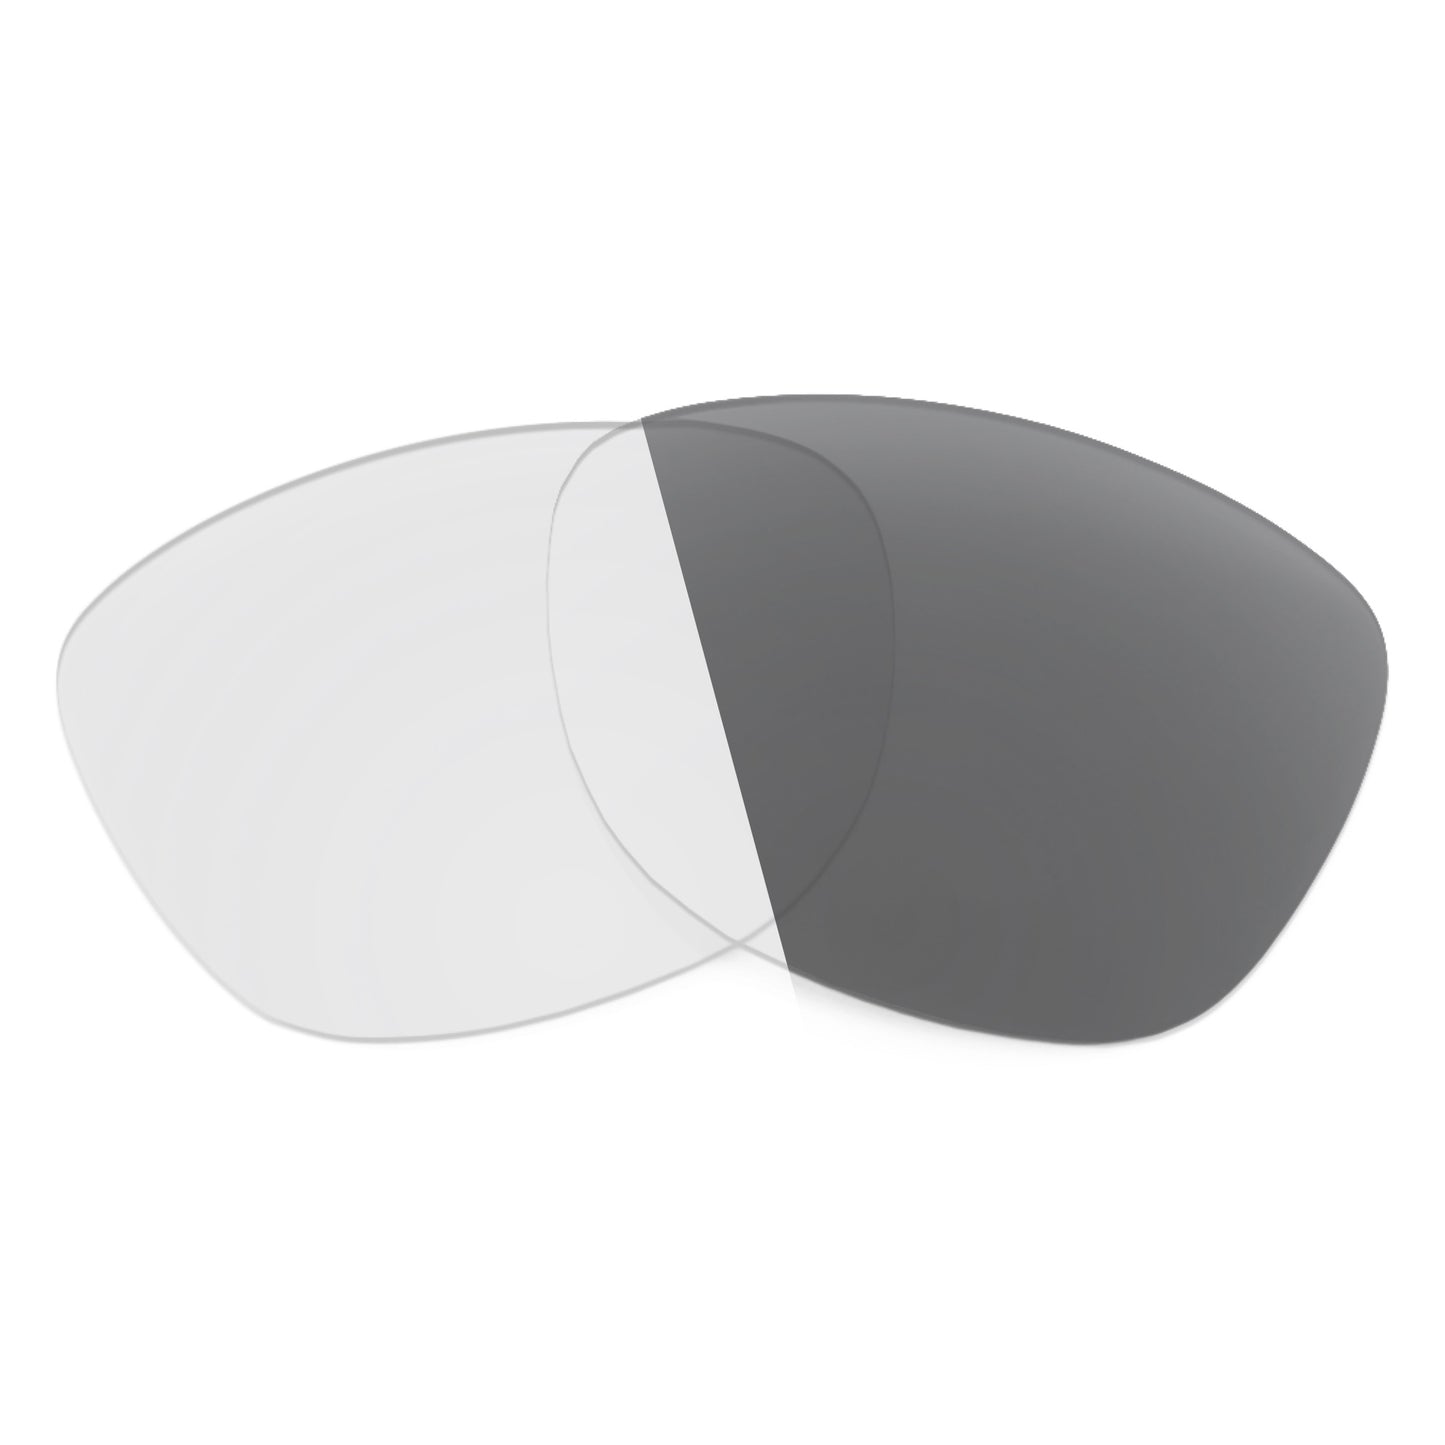 Revant replacement lenses for Ray-Ban RB5294 49mm Non-Polarized Adapt Gray Photochromic